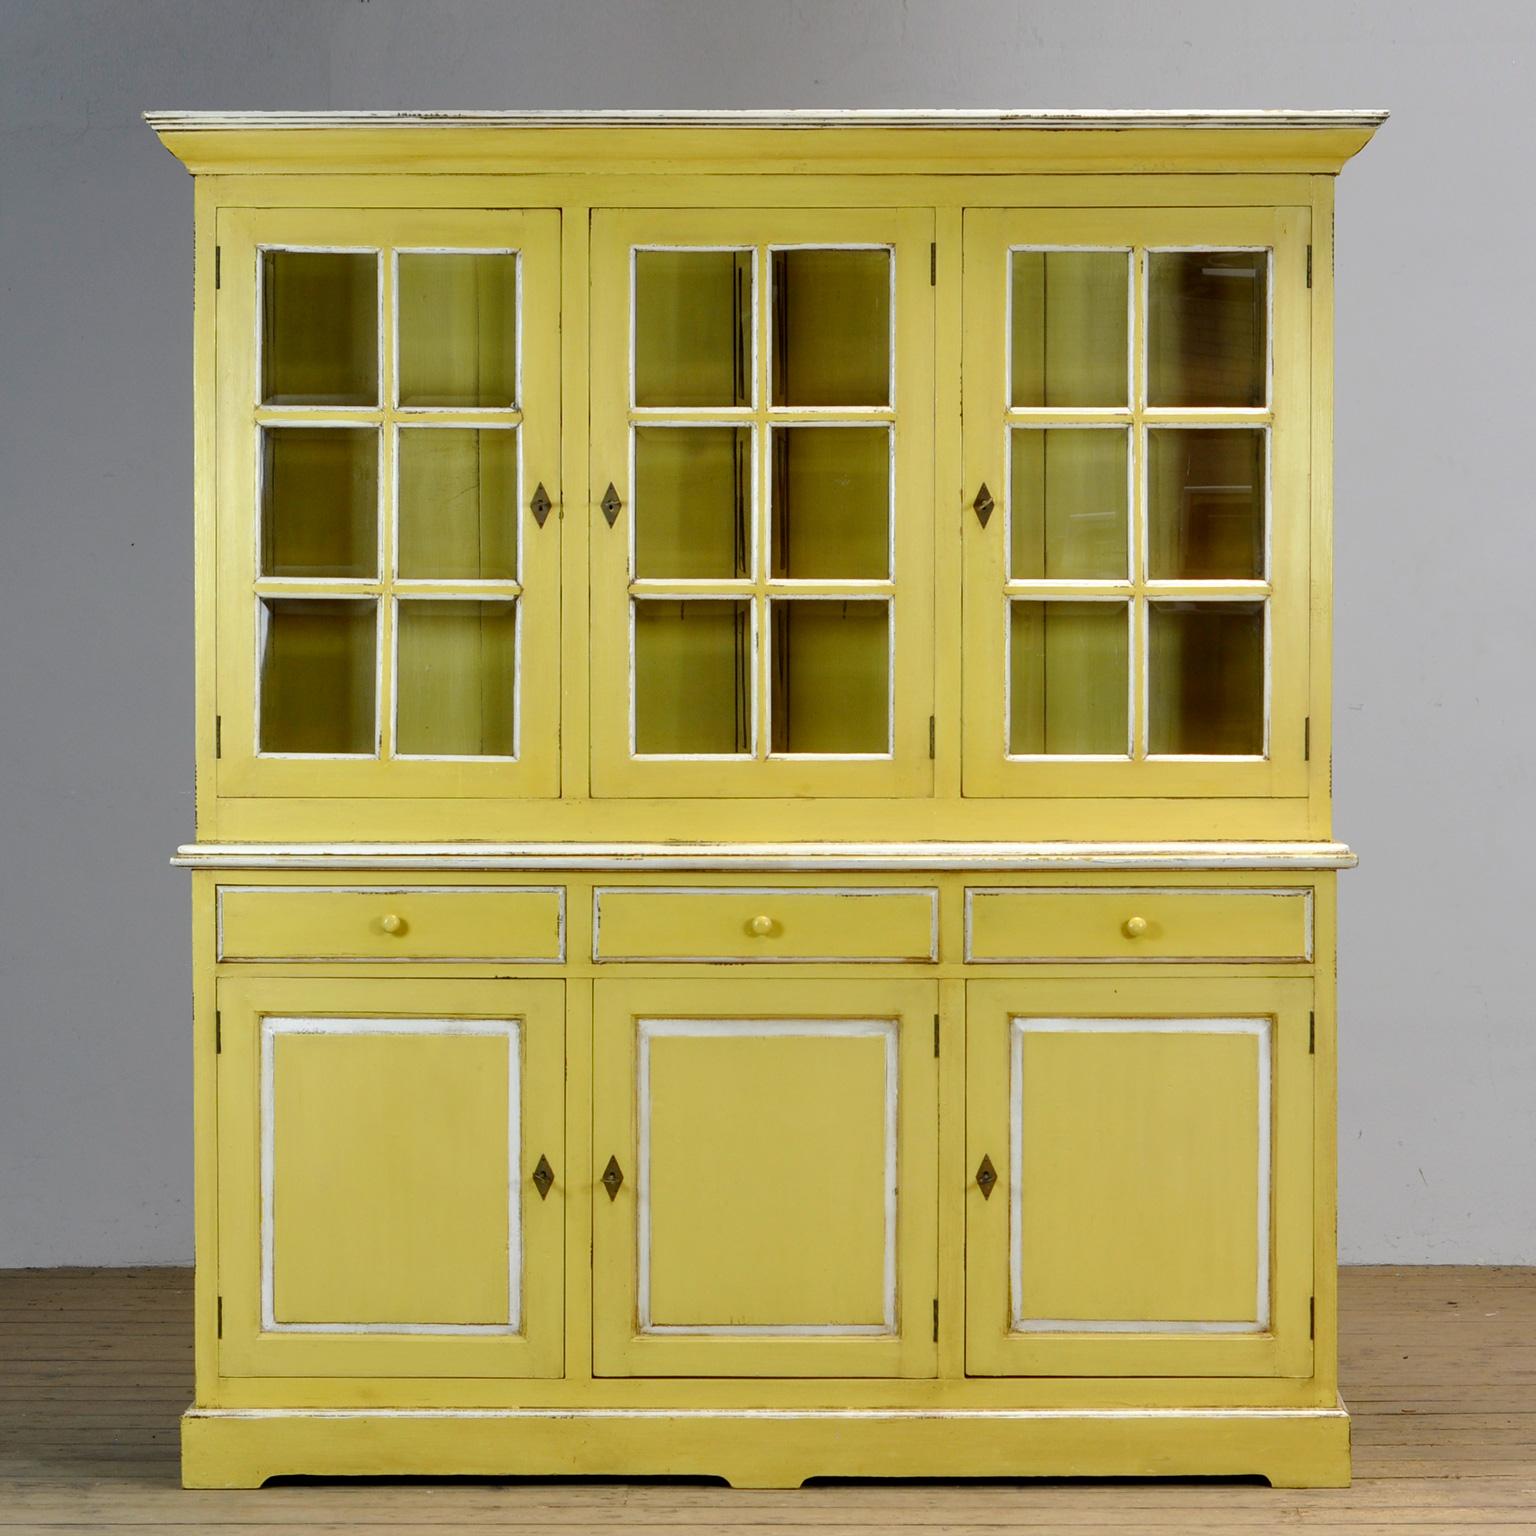 Large pine cupboard from the 1940s. With facet cut glass in the upper part. Two shelves in the upper part and one in the lower part. With properly working locks/keys. The cabinet consists of two parts.
This color yellow was previously widely used in